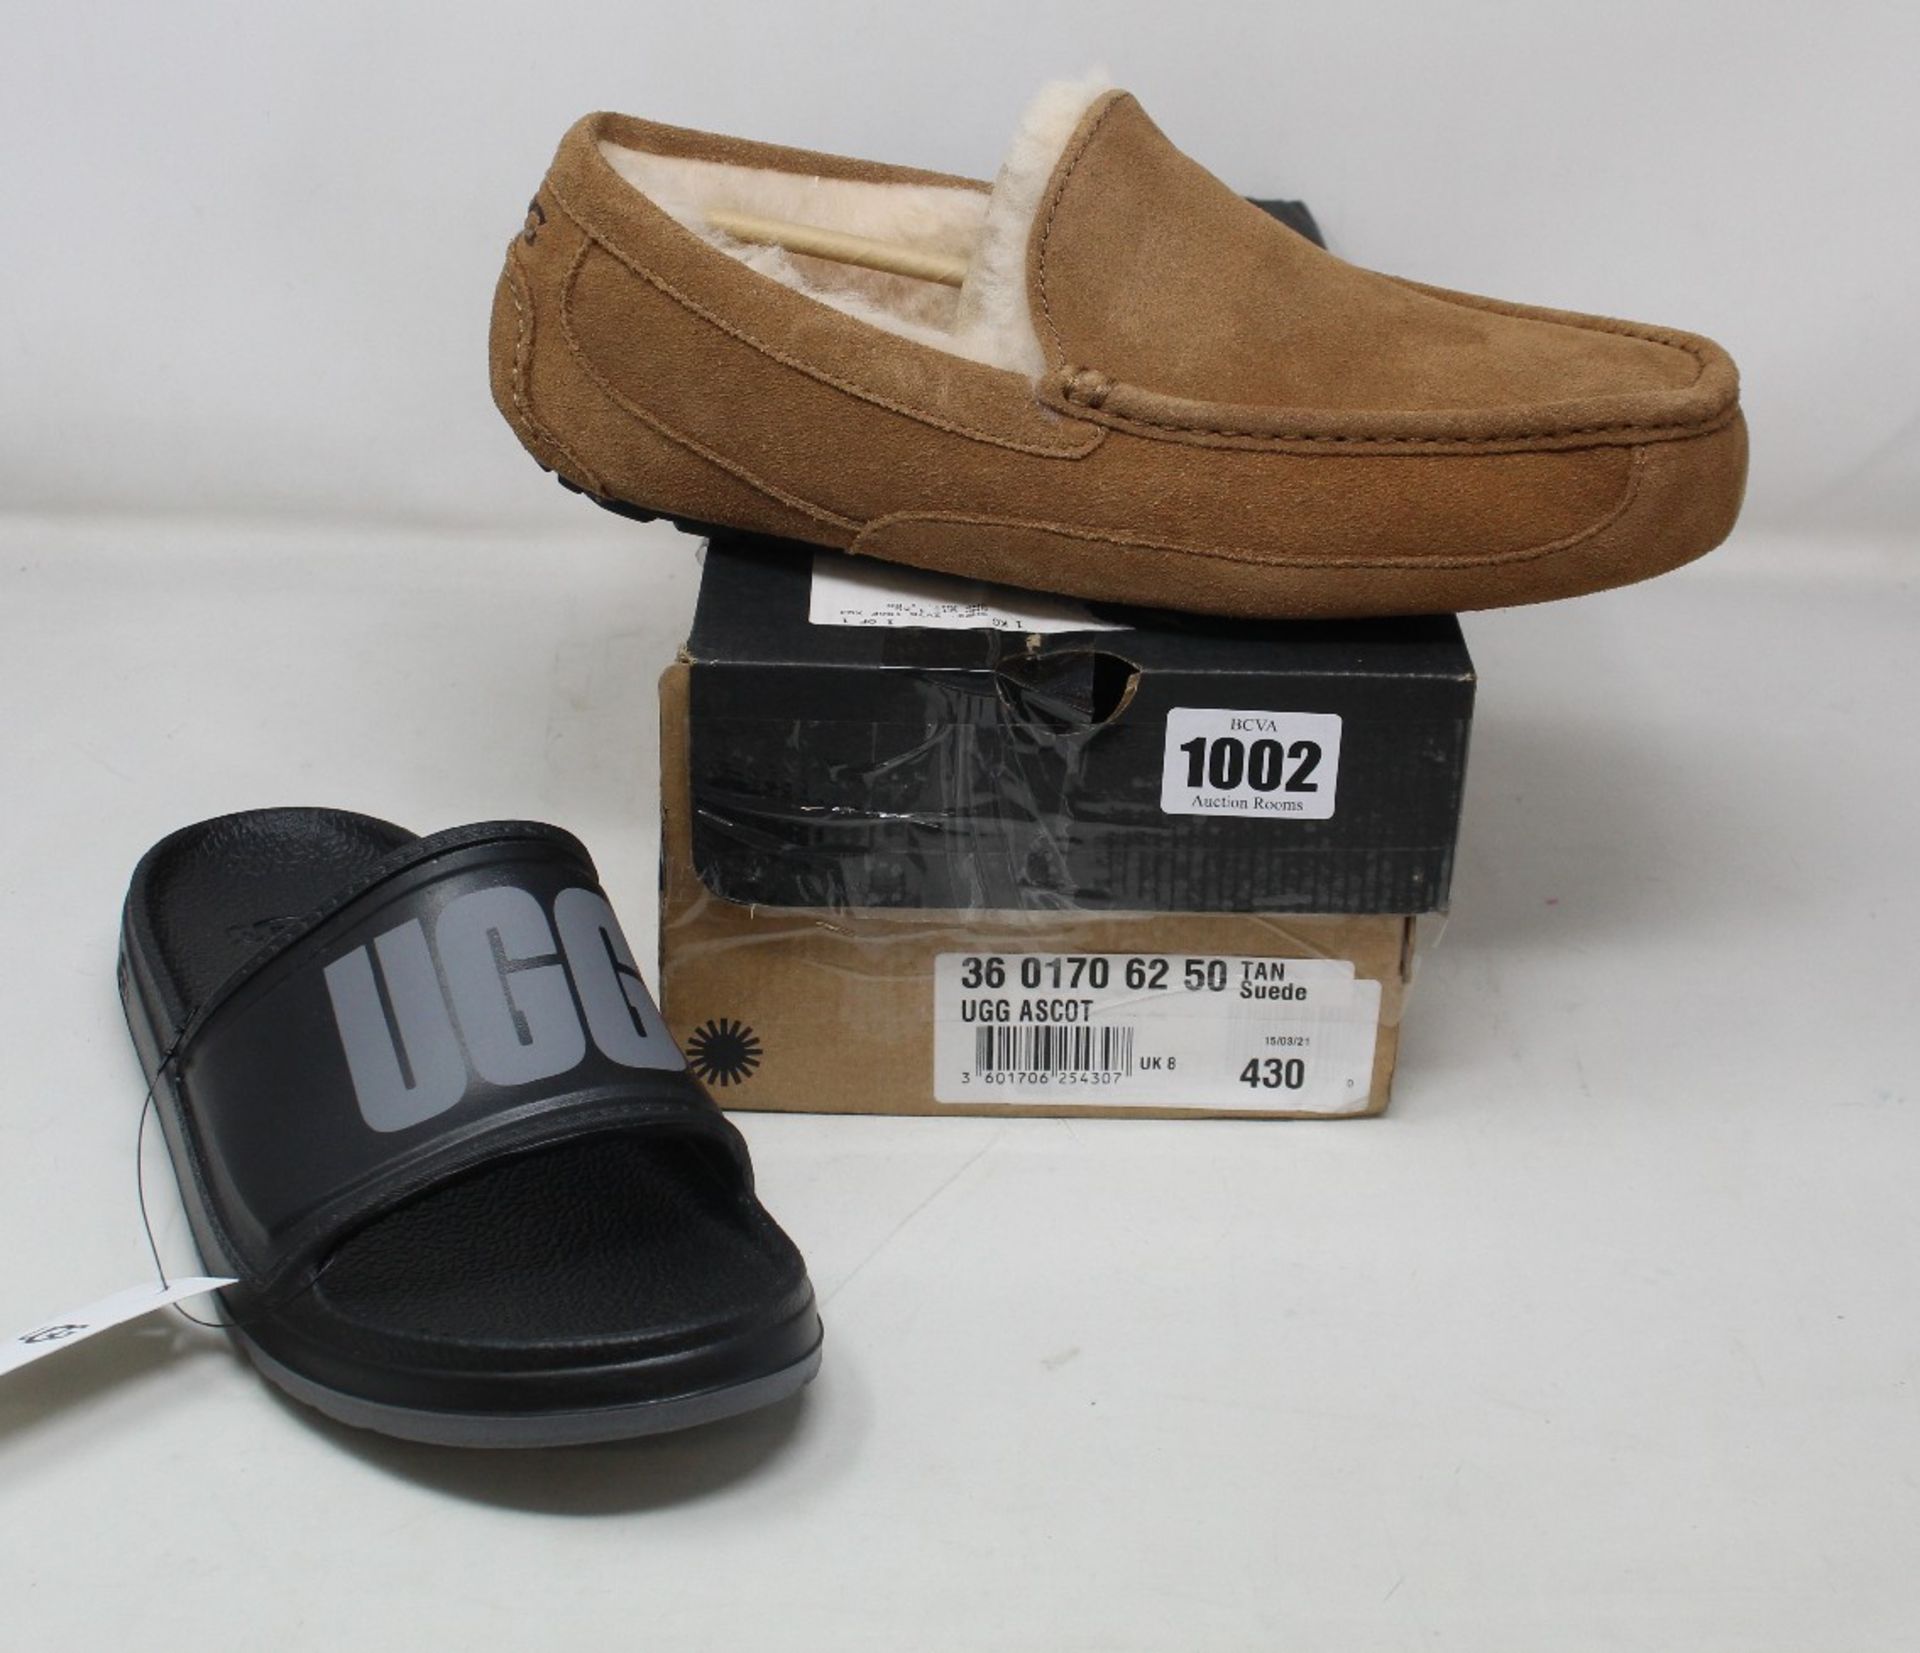 A pair of as new Ugg Ascot slippers (UK 8) and a pair of Ugg Wilcox slide (UK 6).